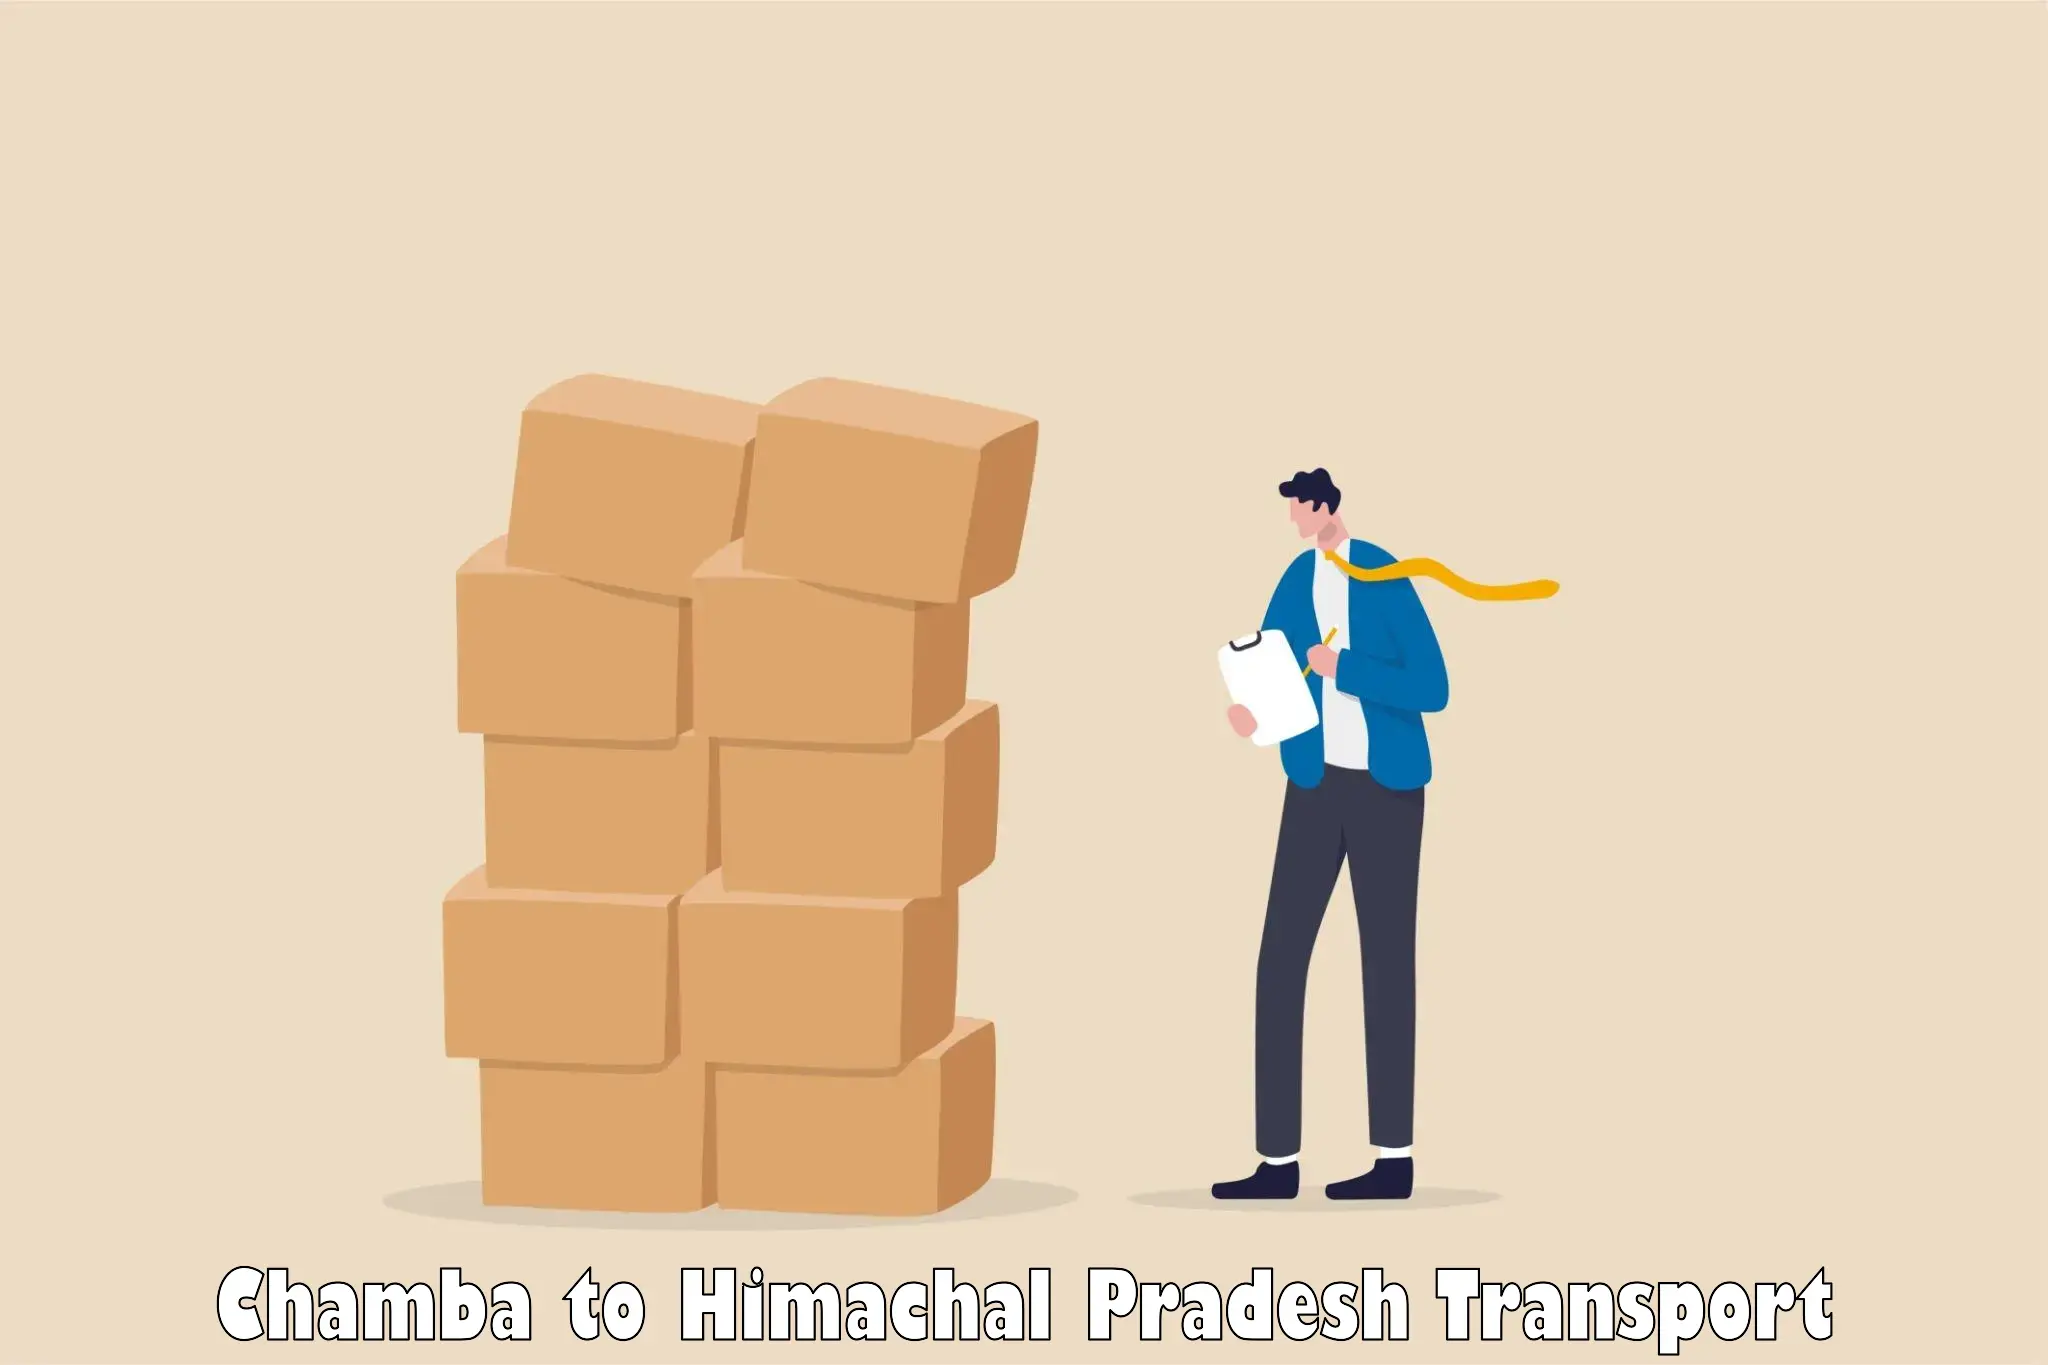 Transport shared services Chamba to Palampur